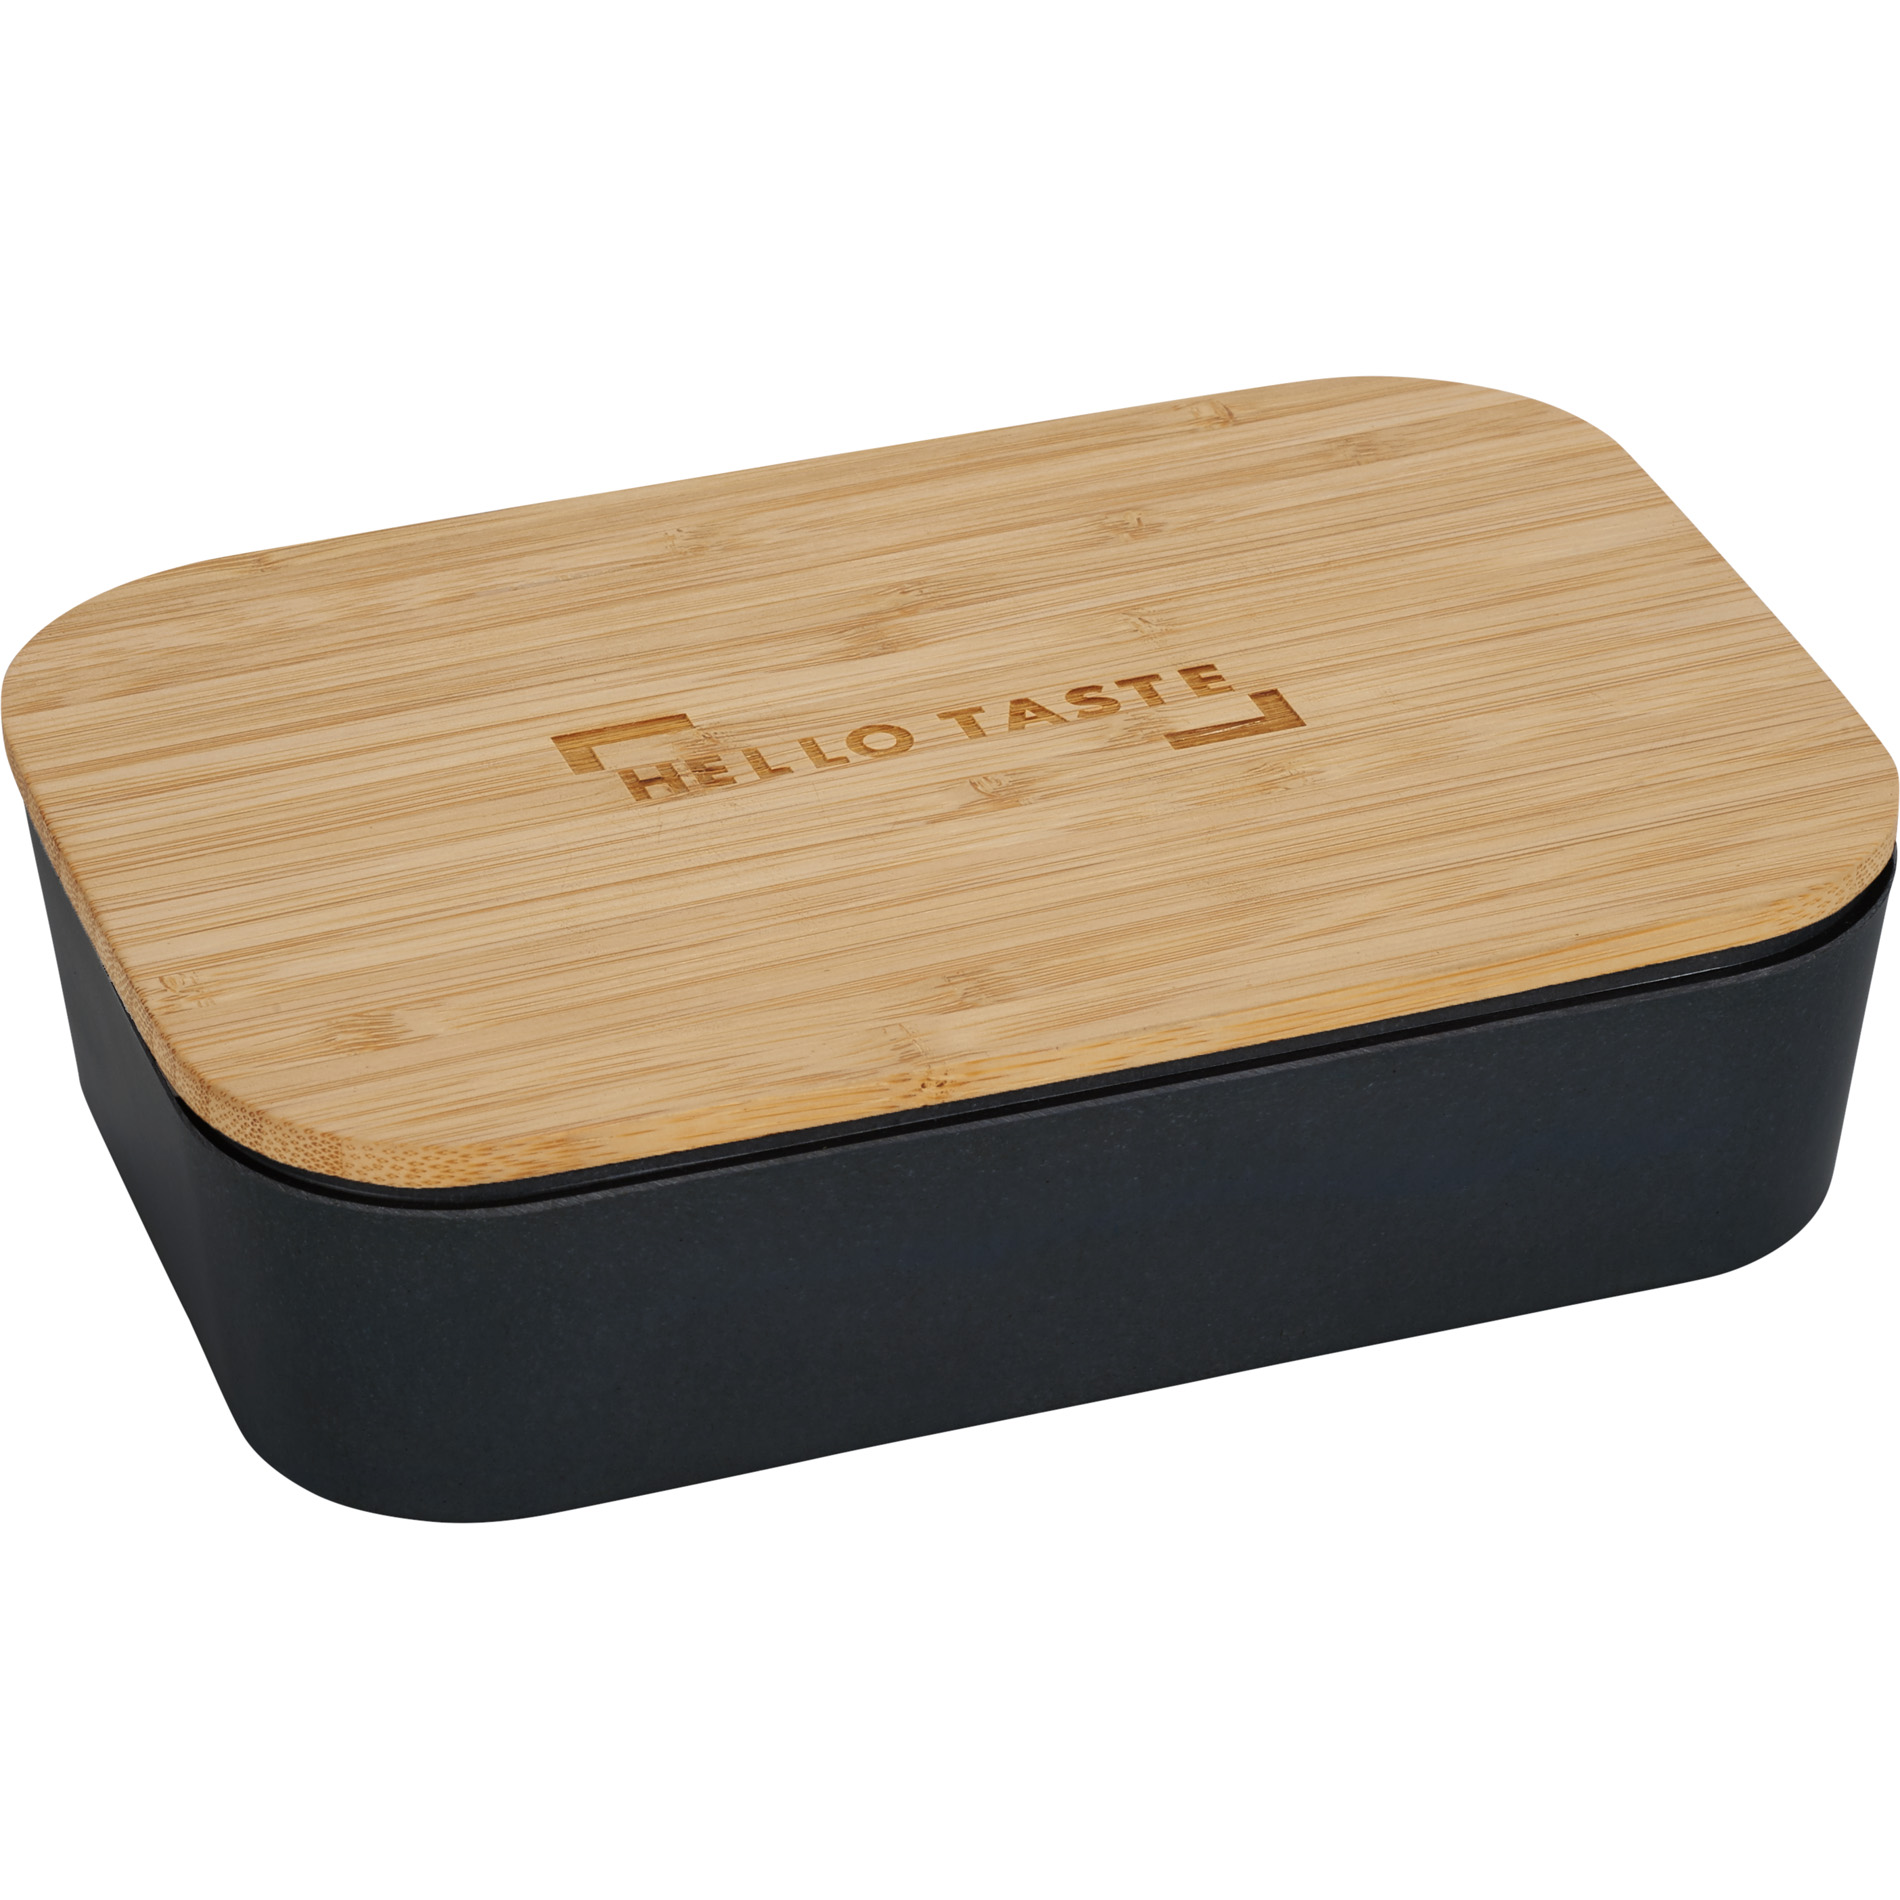 Bamboo Fiber Lunch Box with Cutting Board Lid - Show Your Logo